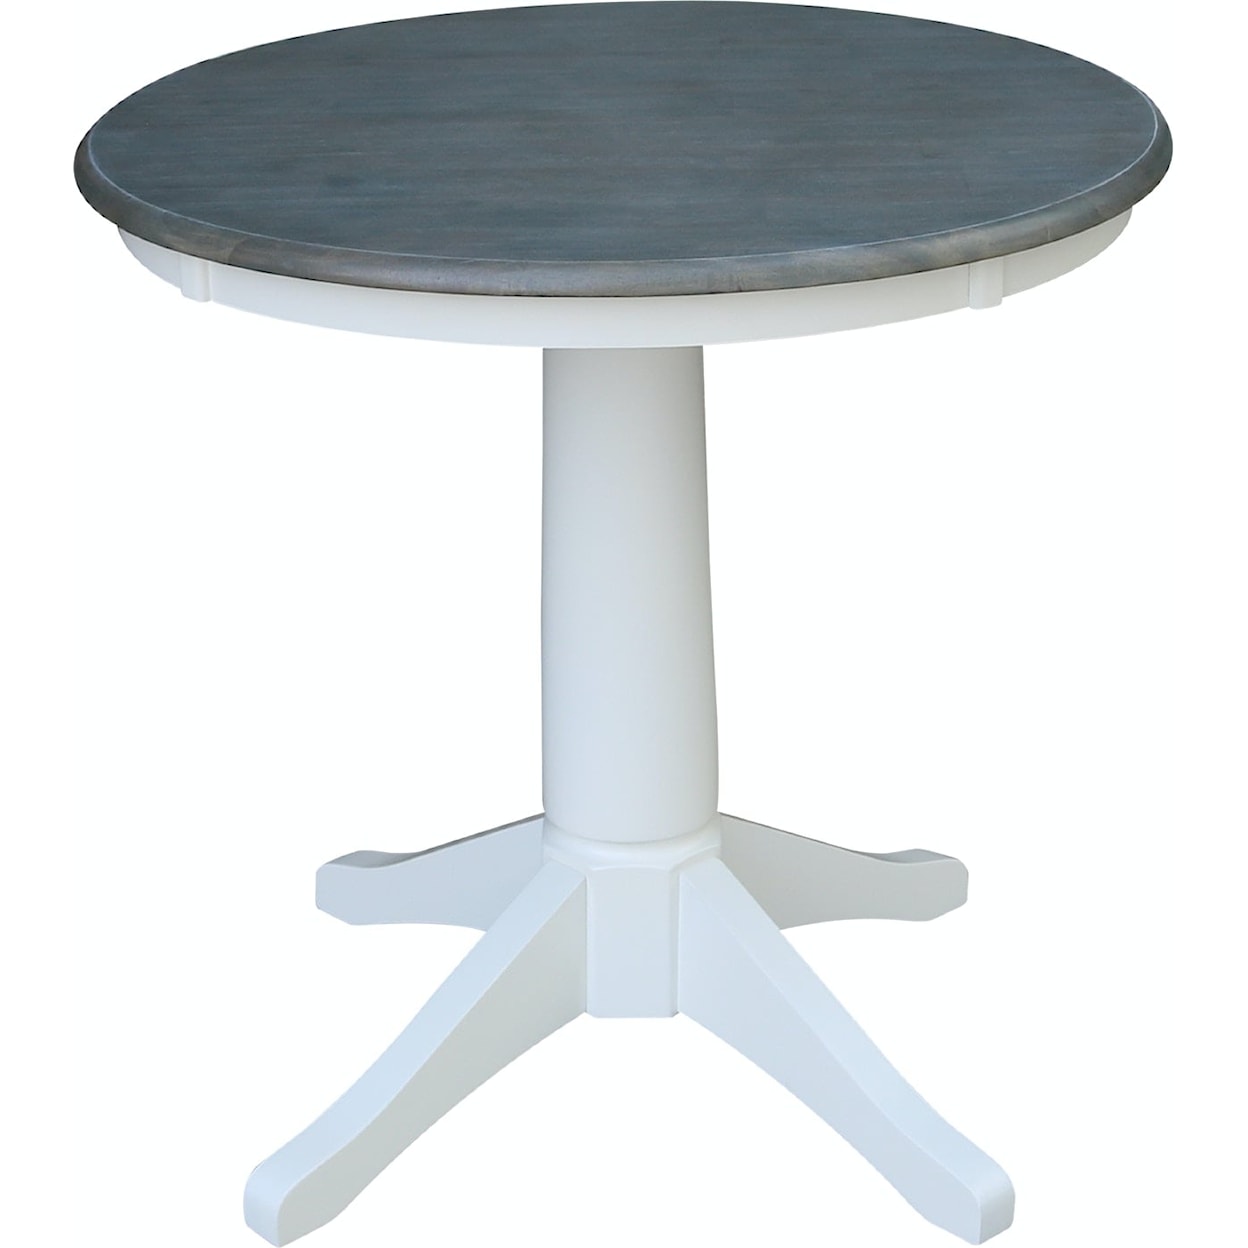 John Thomas Dining Essentials 30'' Pedestal Table in Heather Gray/ White